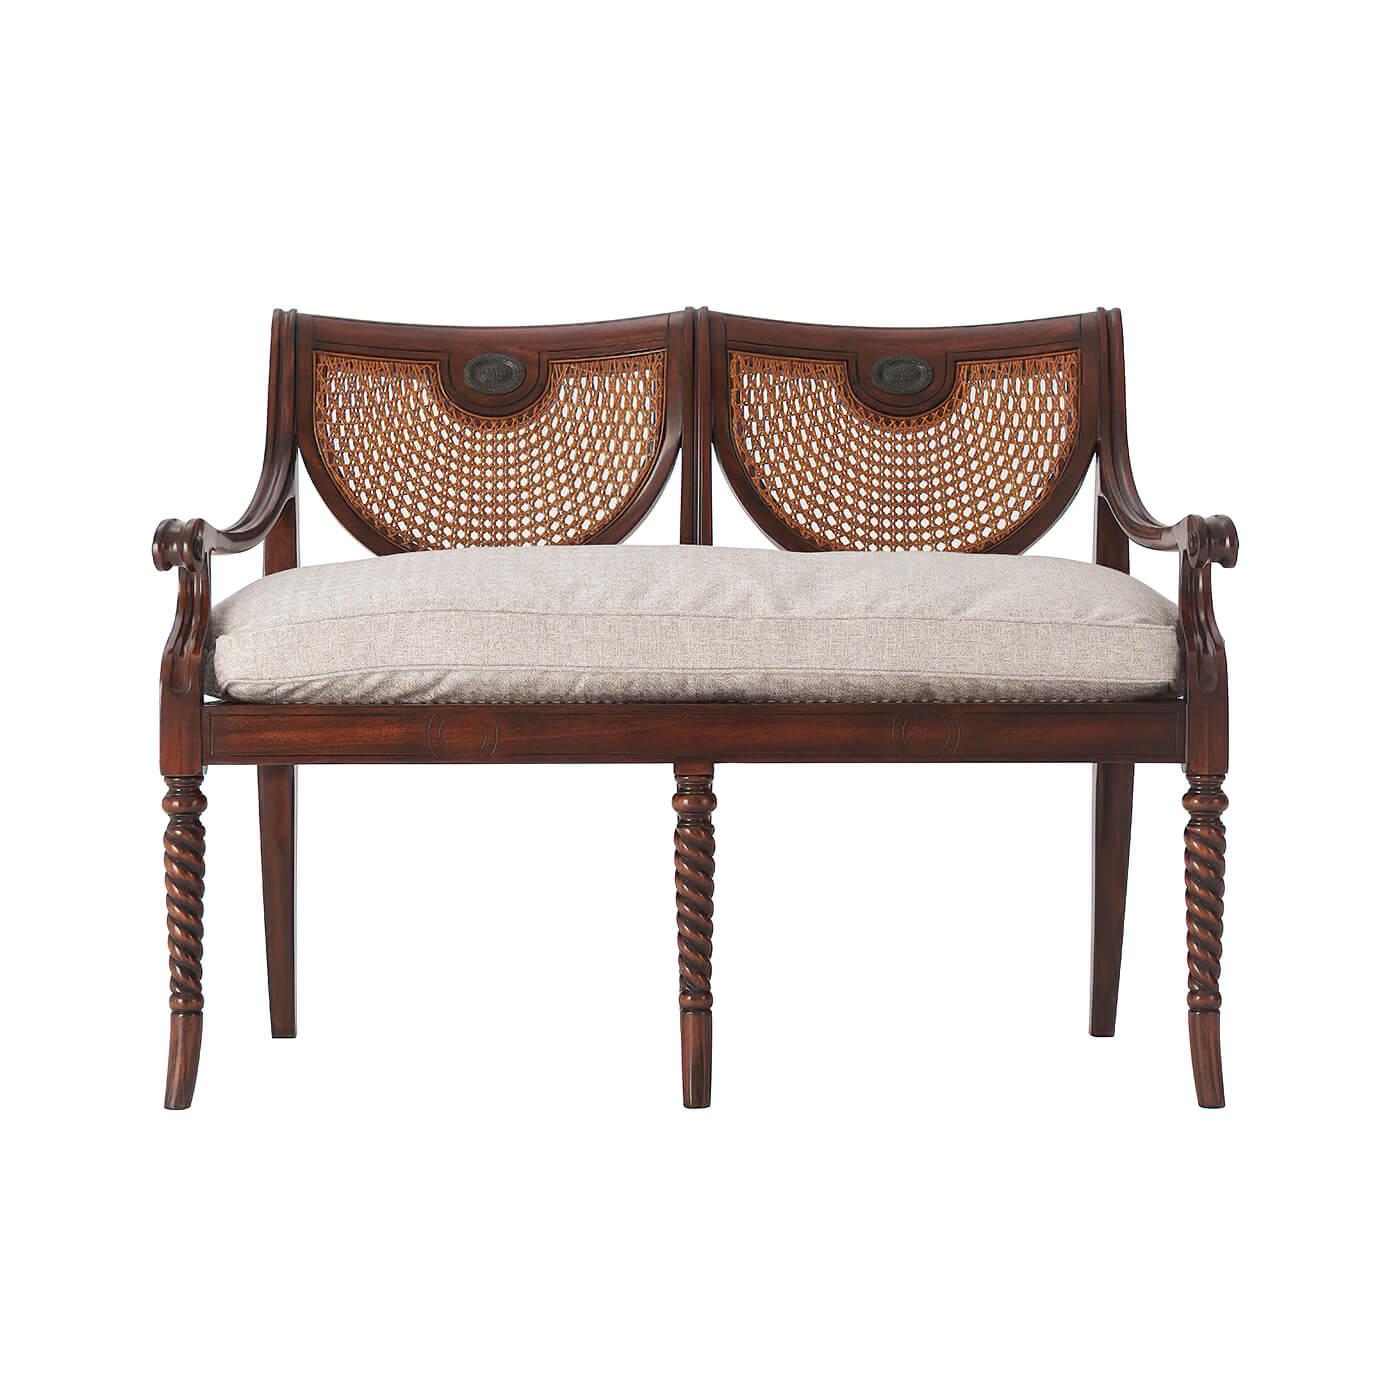 A hand-carved double chair back settee with caned back and seat, arms and silk cushion seat, on spiral turned legs. The original Regency.

Barley Houndstooth-UP4519 Fabric
Trim: Welting
Dimensions: 46